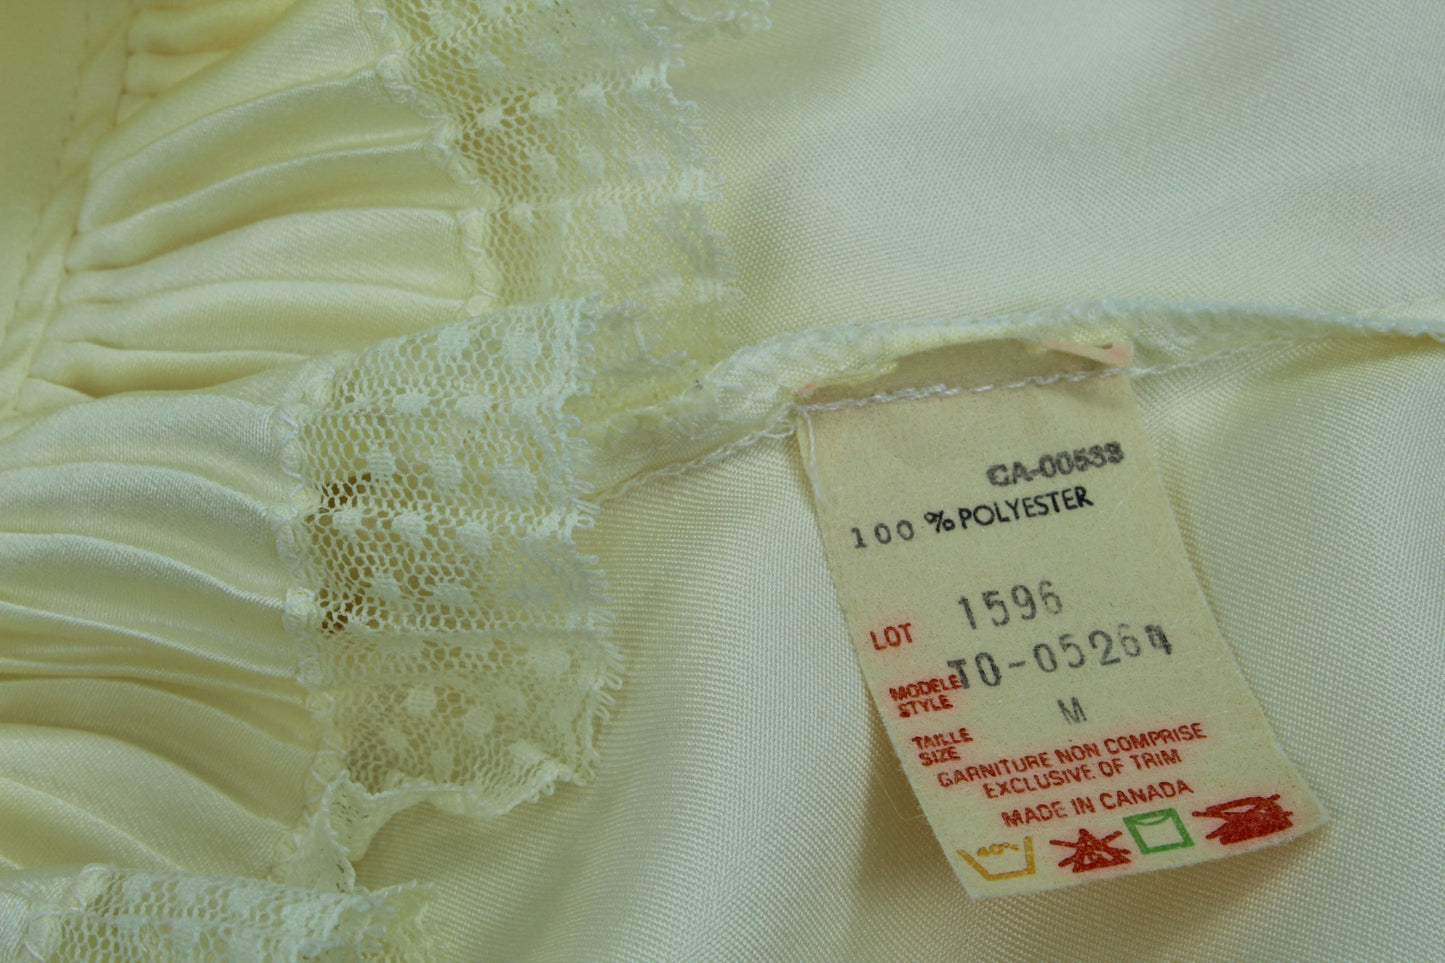 Bill Tice Nightgown Peignoir Set Ivory Pleated Polyester Lace Full Length Size Medium canada